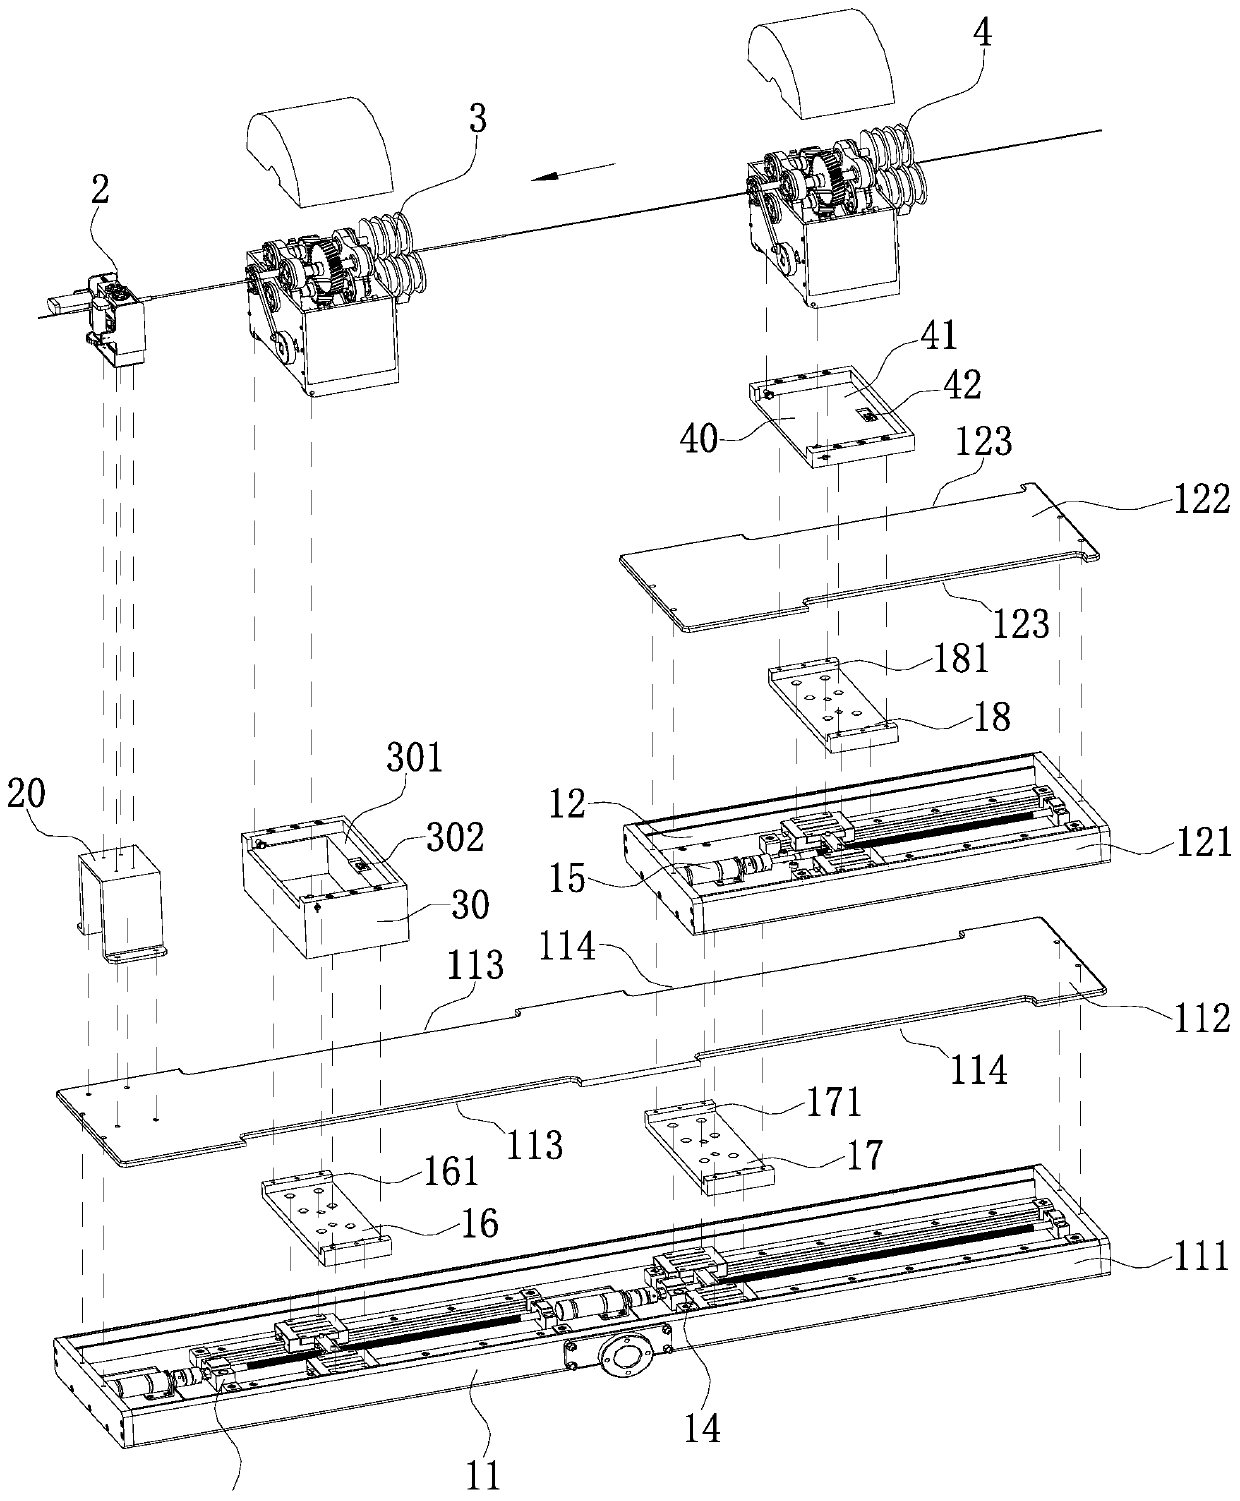 Minimally invasive vascular intervention surgical robot catheter and guide wire propulsion mechanism